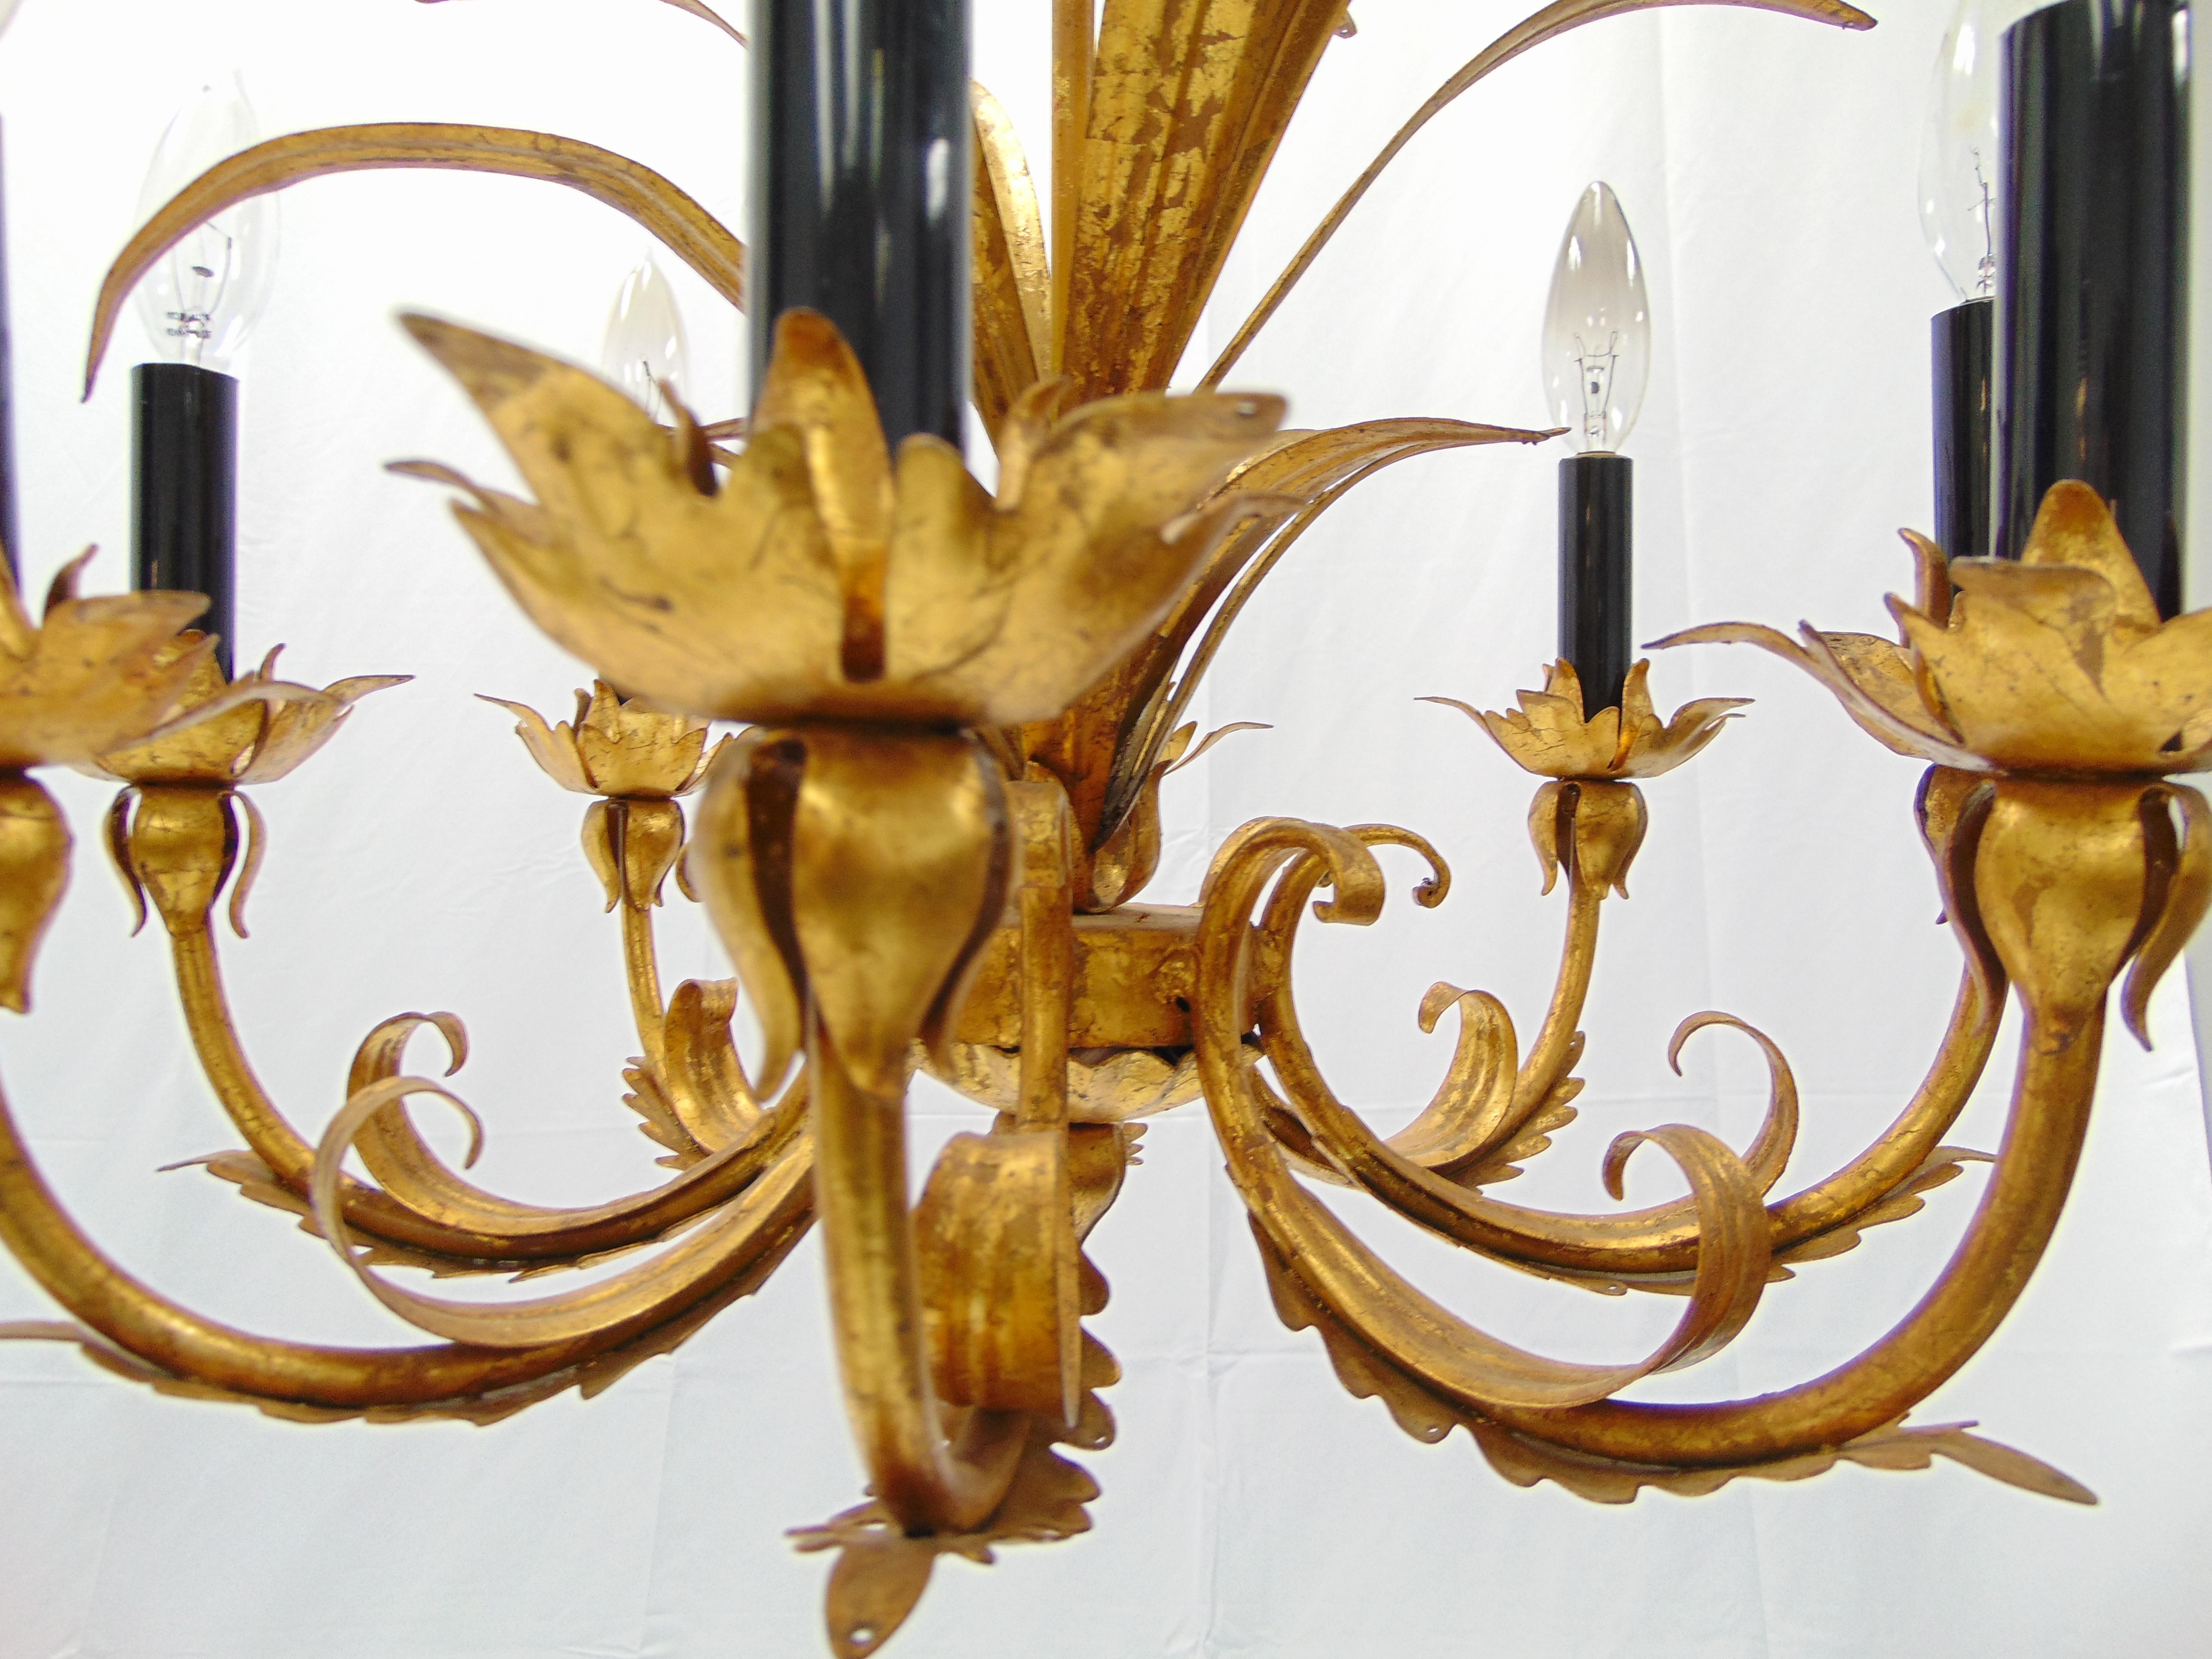 This is a beautiful vintage 1960s Hollywood Regency gold gilt chandelier. It holds 8 lights. The dimensions are: 23